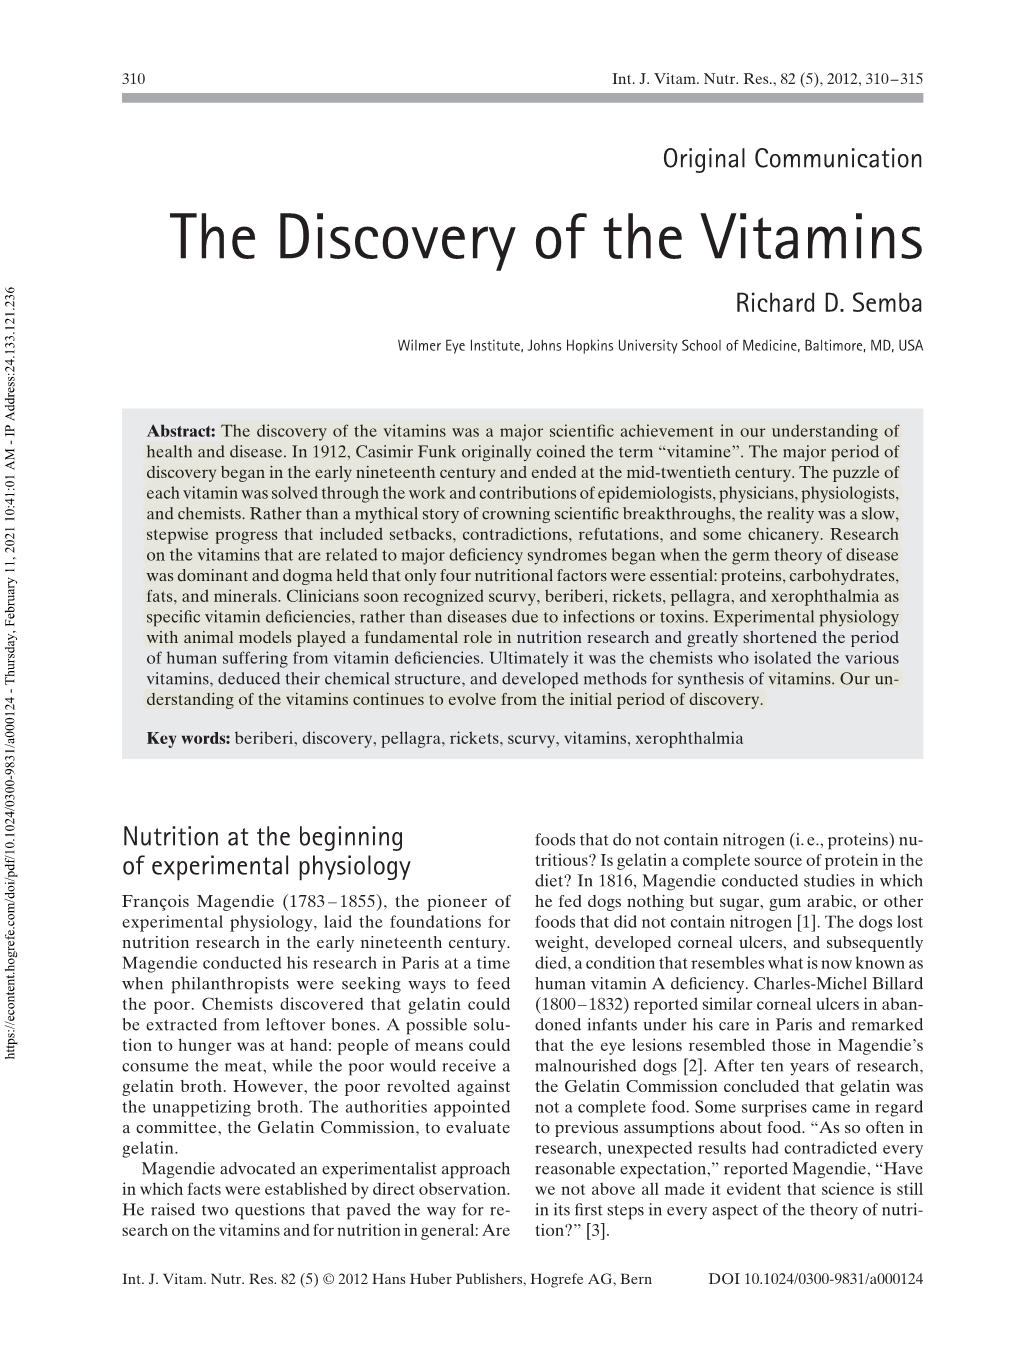 The Discovery of the Vitamins Richard D